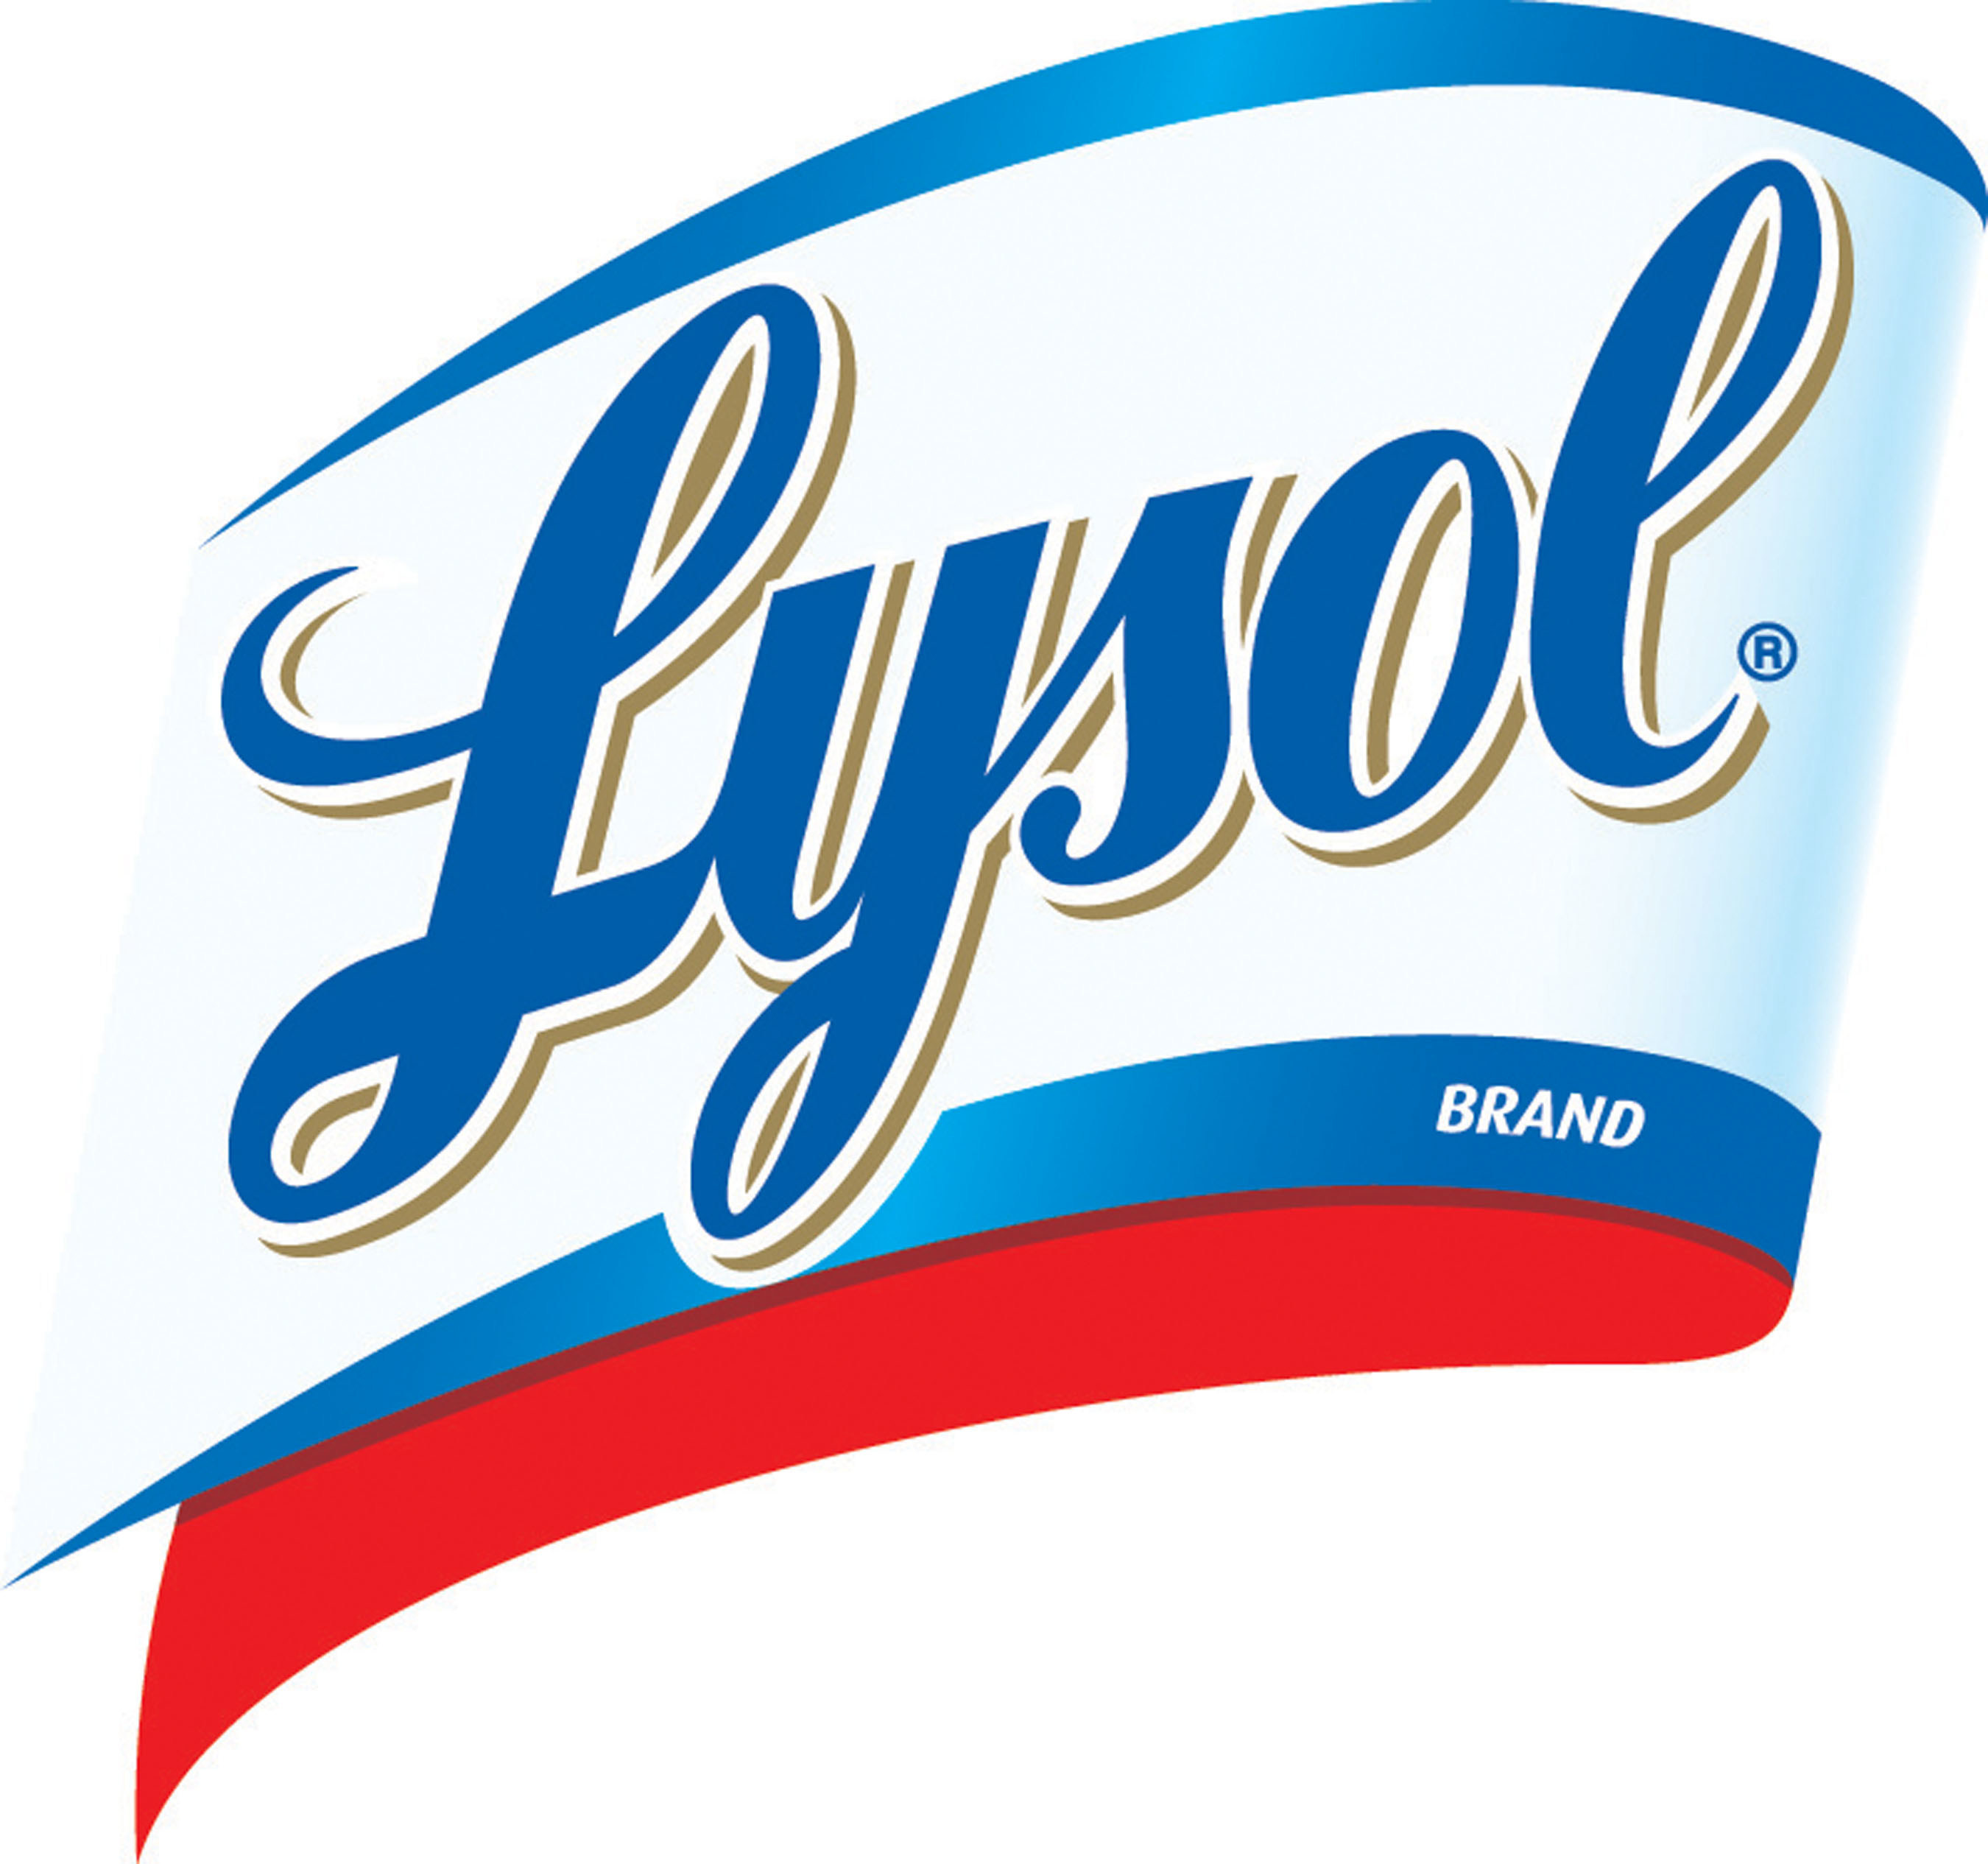 LYSOL(R) CHALLENGES ELEMENTARY STUDENTS TO EXPOSE GERMS IN THE CLASSROOM, REVEALING THE TRUE NUMBER OF "STUDENTS" IN US SCHOOLS